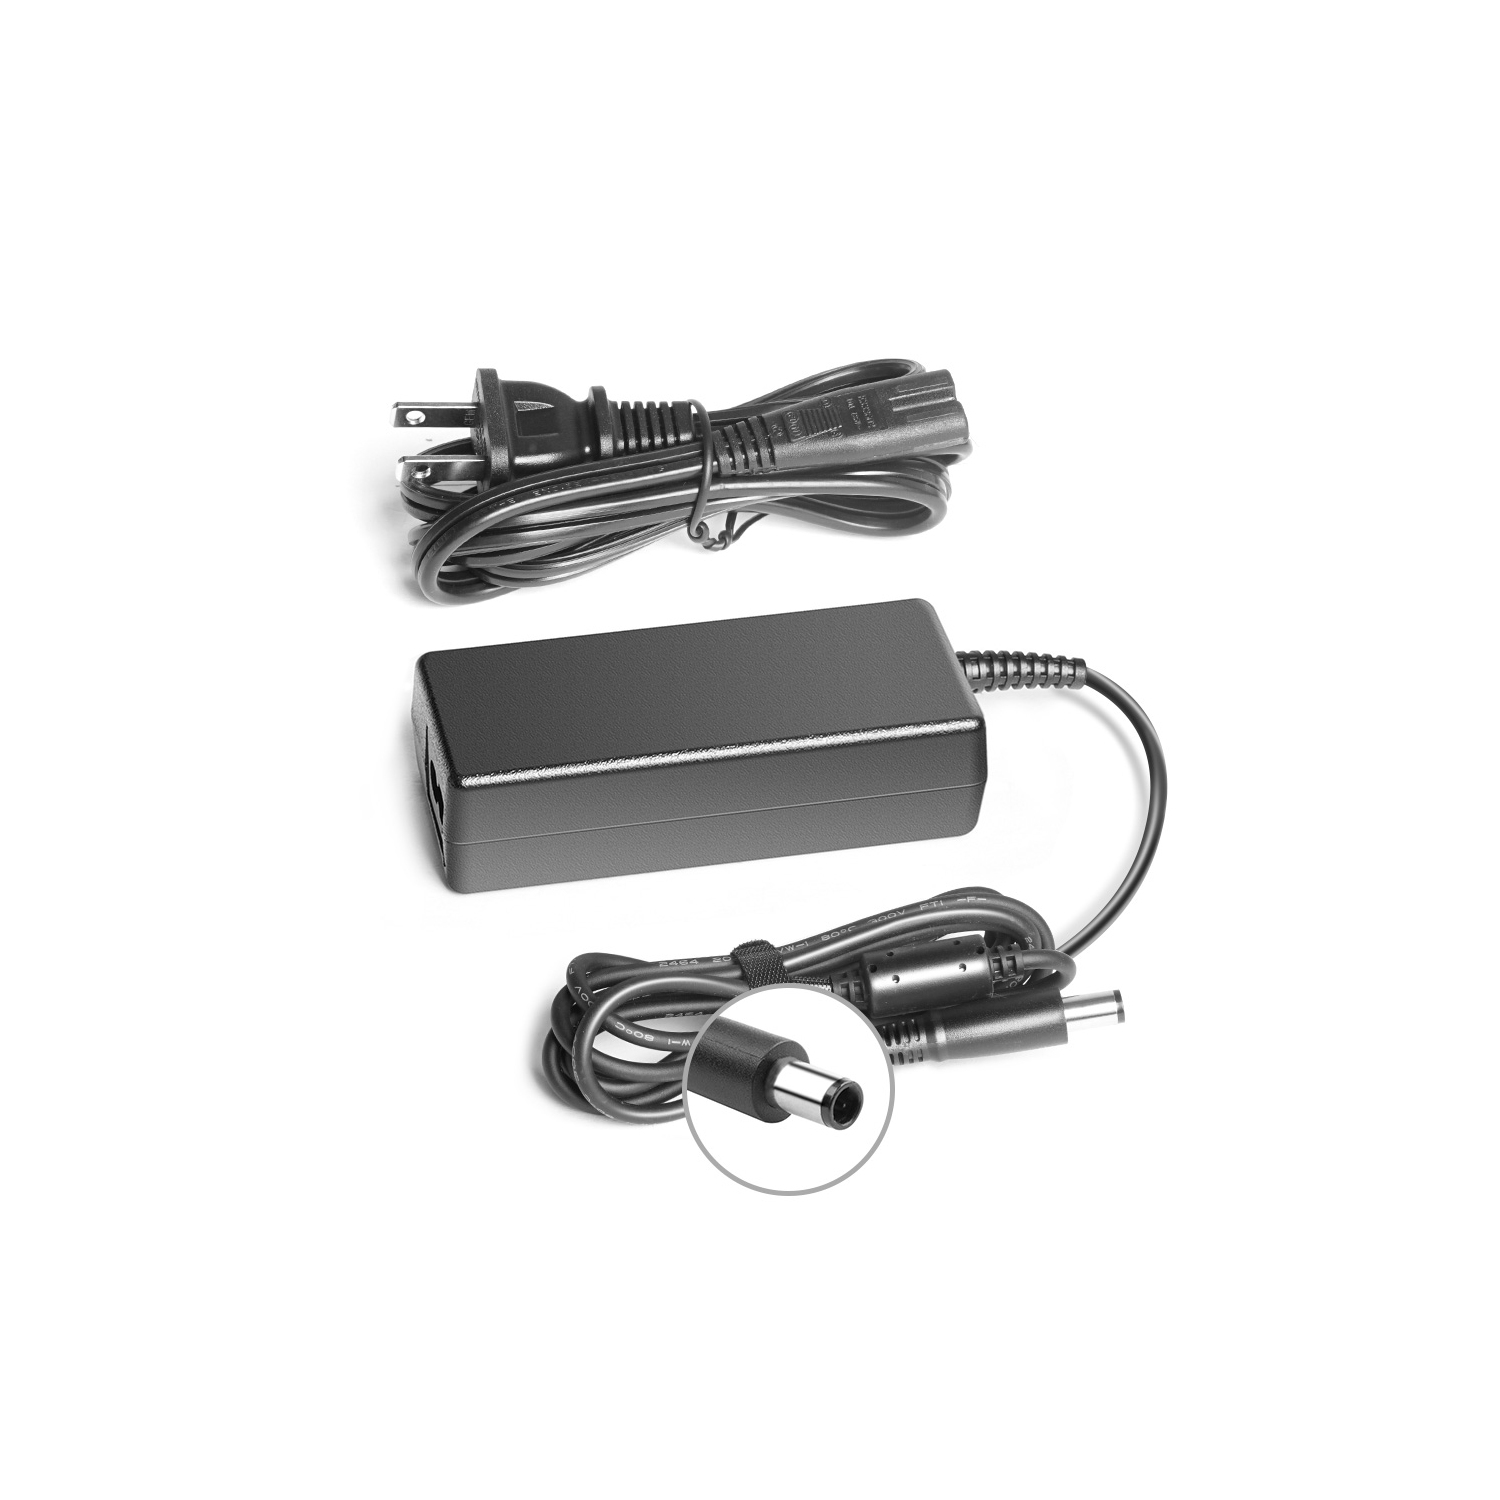 Laptop Charger 90W 19.5V 4.74A Power Supply AC Adapter for HP Elitebook 2530p 2730p 2540p 2740p 2170p 2570p 8530w 8530p 8730w 8440p 8540w Pavilion DM1 DM1z DM4